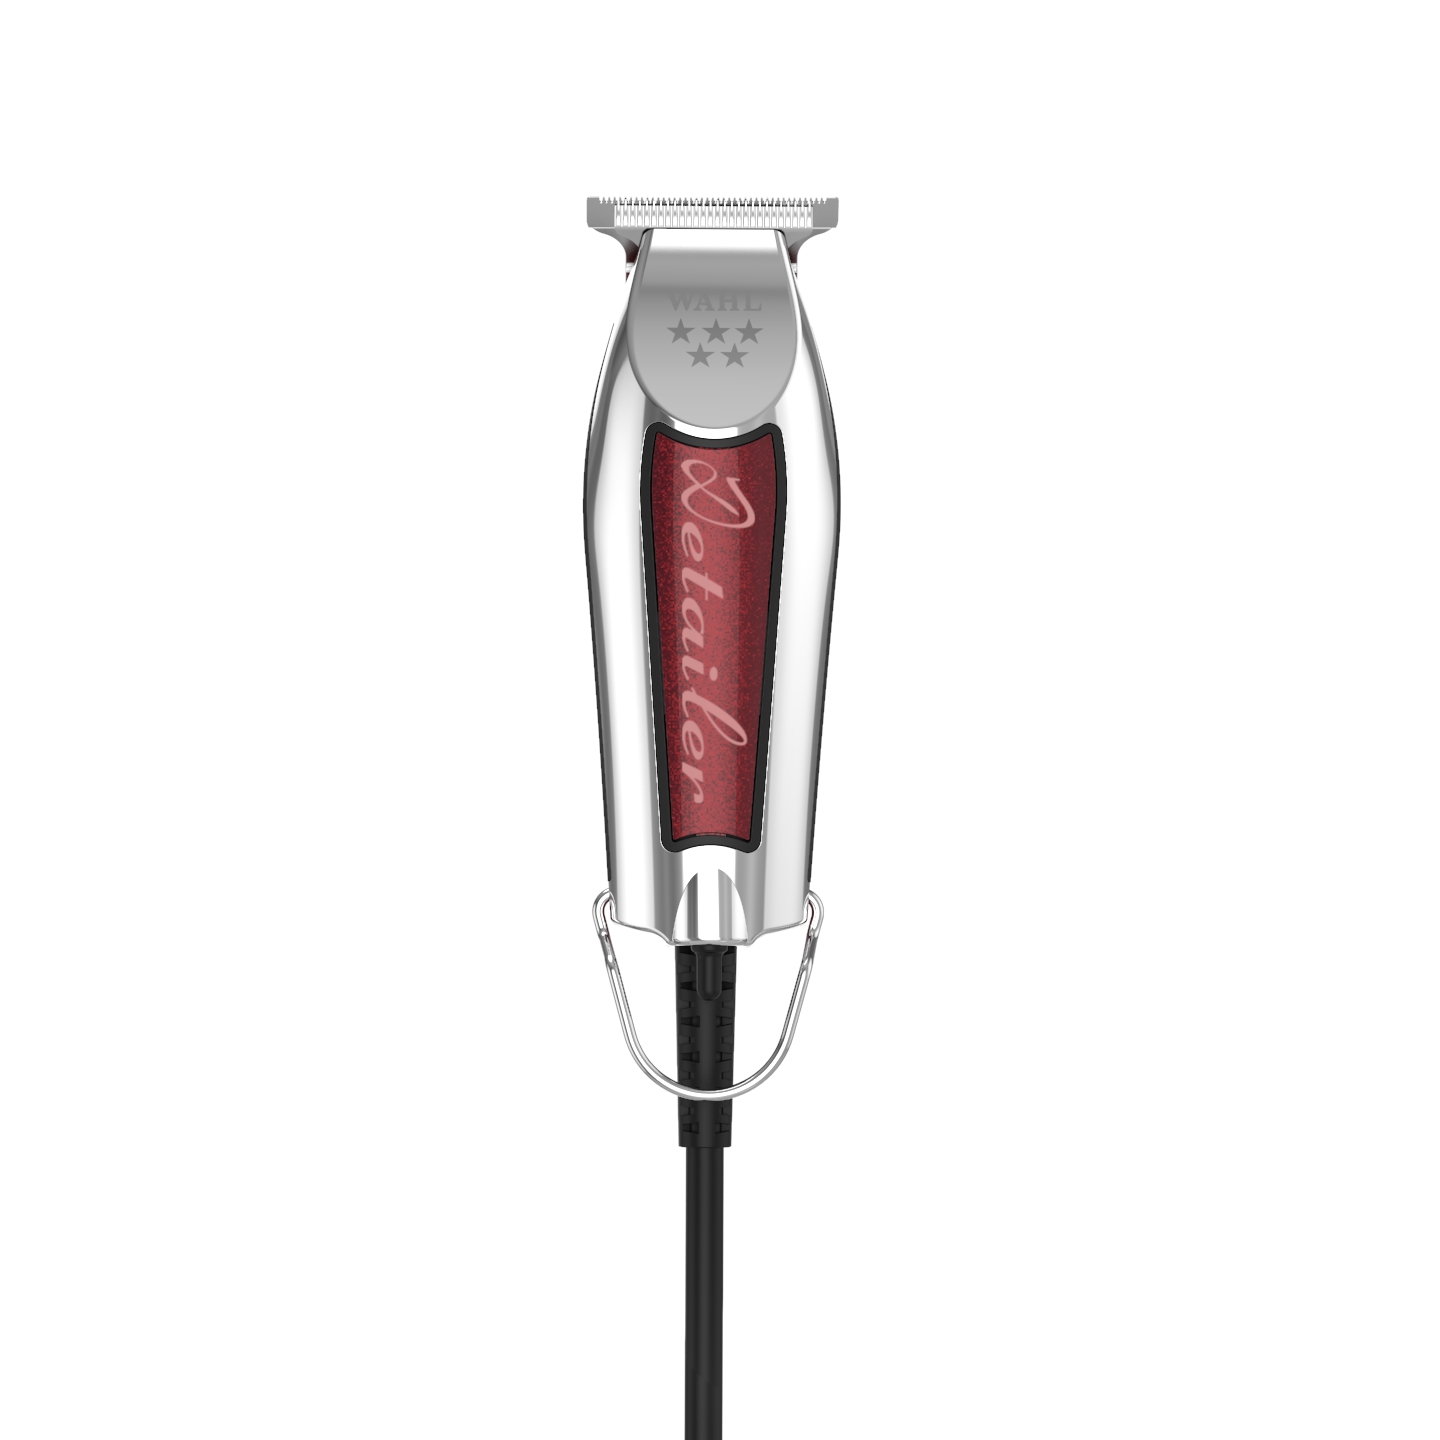 wahl professional barber clippers